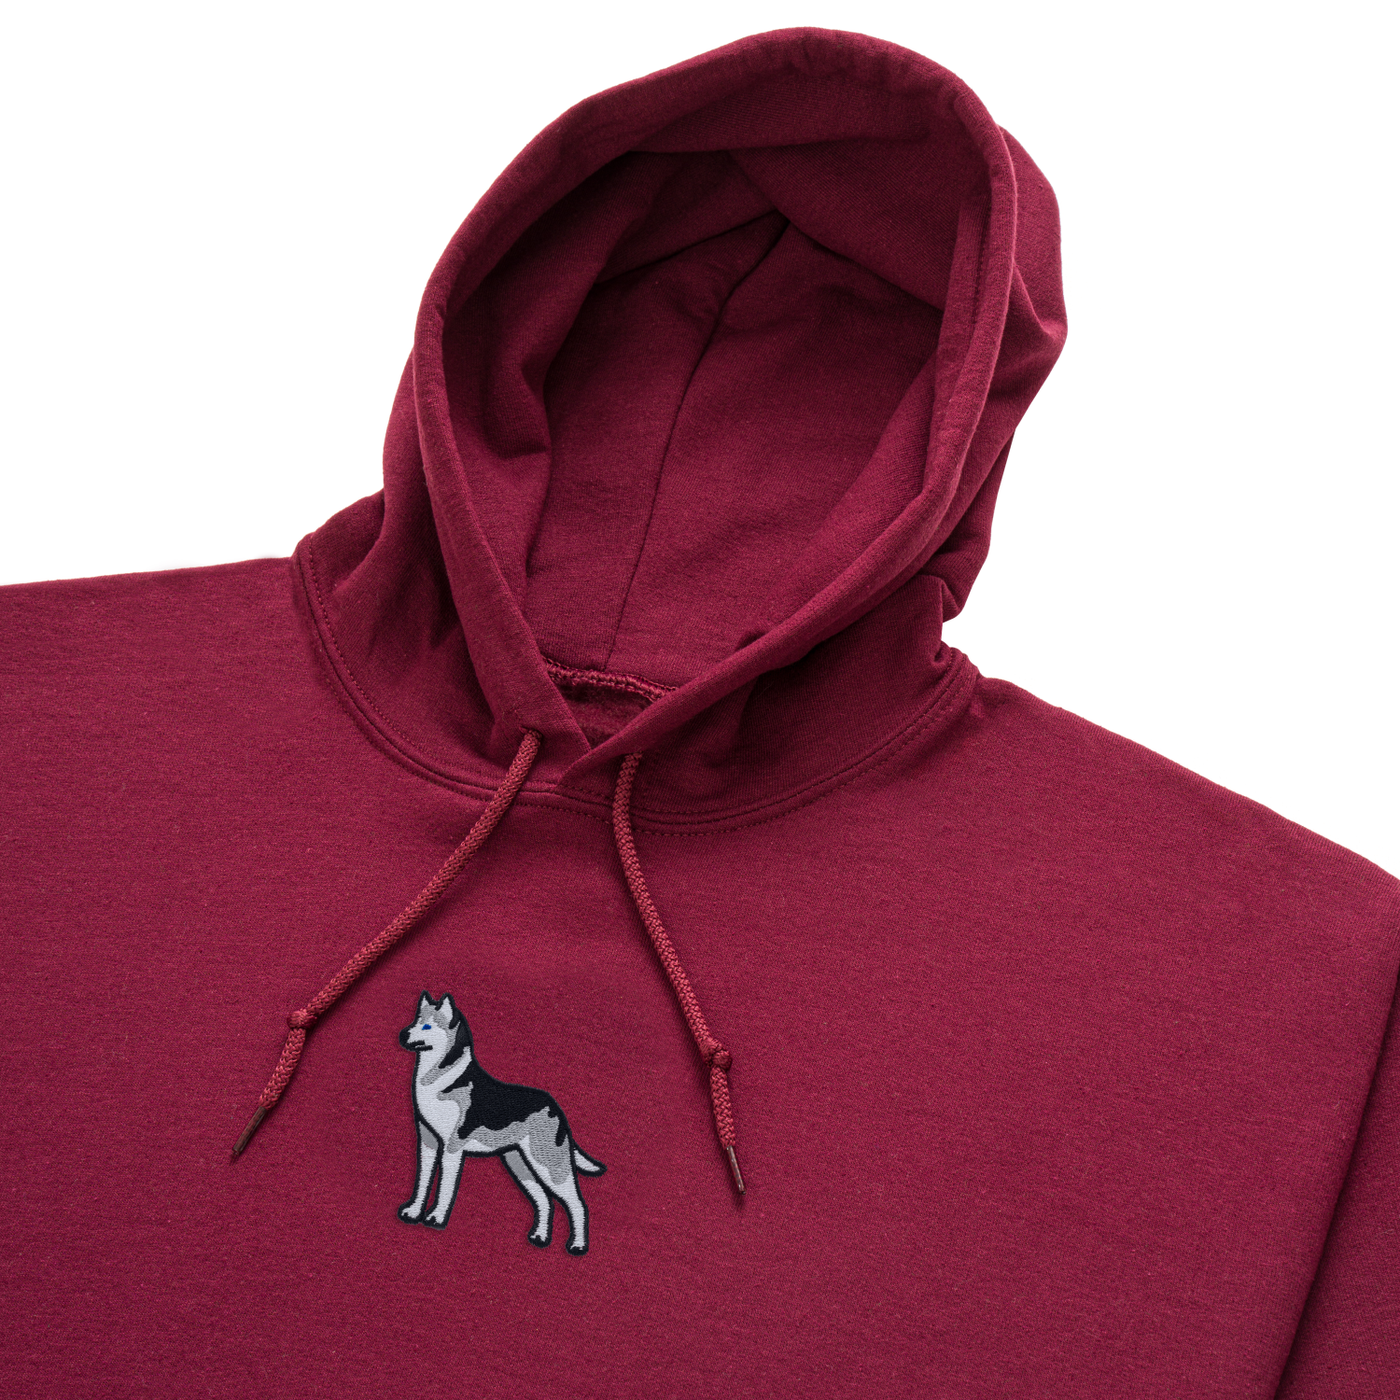 Bobby's Planet Men's Embroidered Siberian Husky Hoodie from Paws Dog Cat Animals Collection in Maroon Color#color_maroon